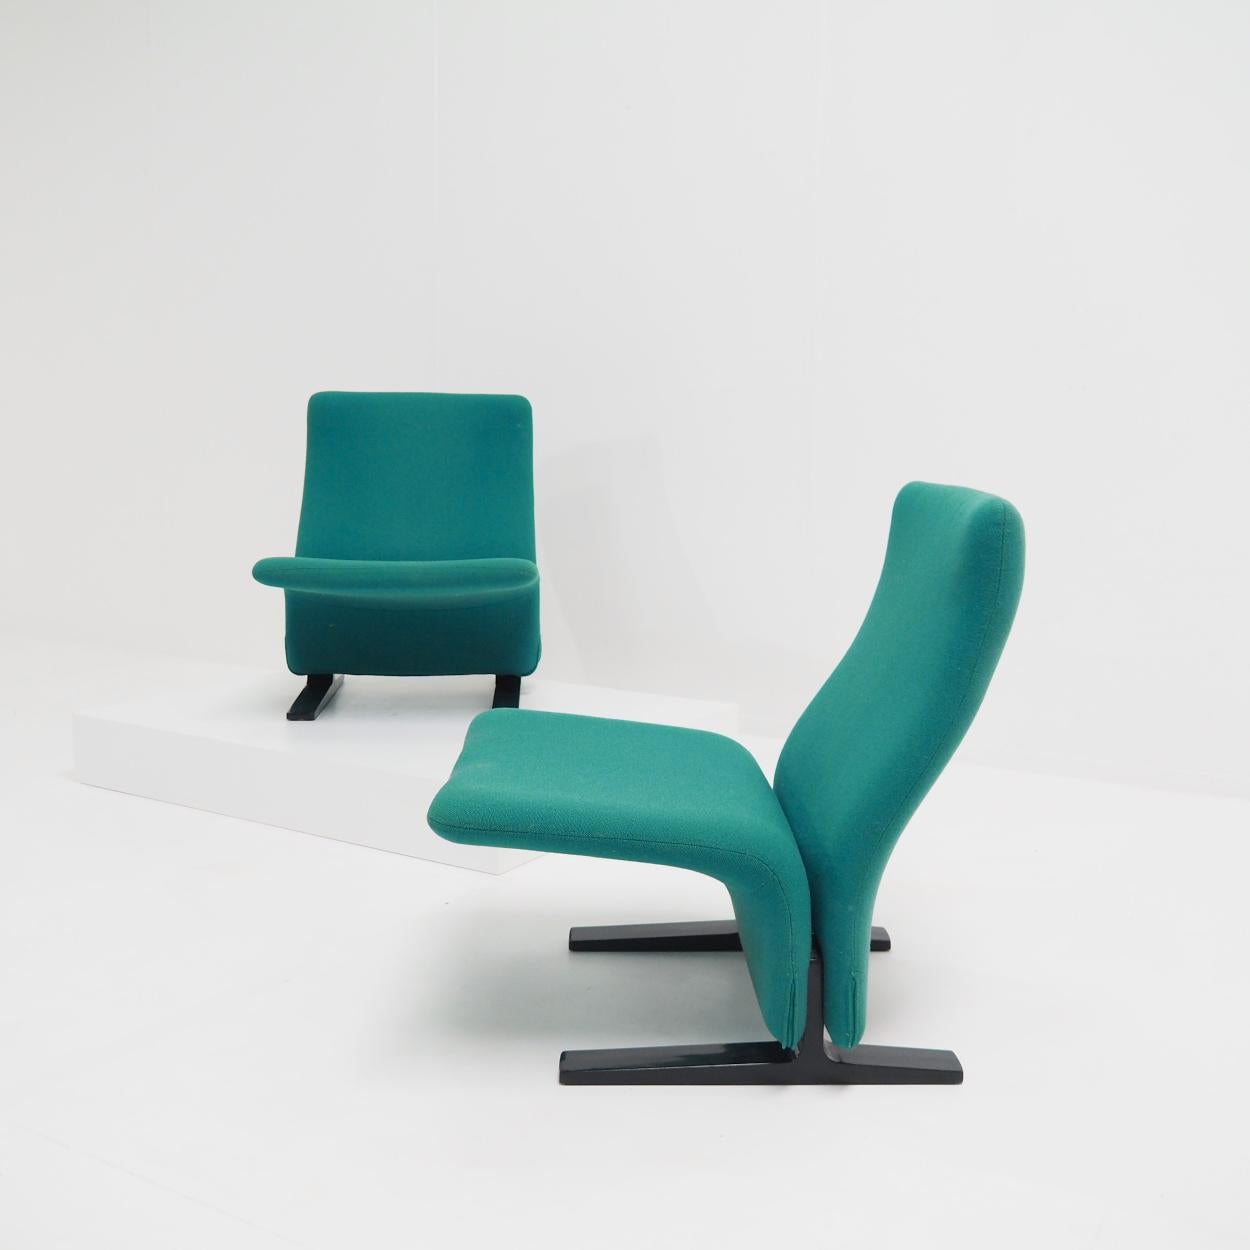 Beautiful set of chairs designed by the Frech designer Pierre Paulin and manufactured by the Dutch company Artifort. The chairs were initially designed for the Concorde waiting area of Paris-Charles De Gaulle airport.

This set dates from the 1990s